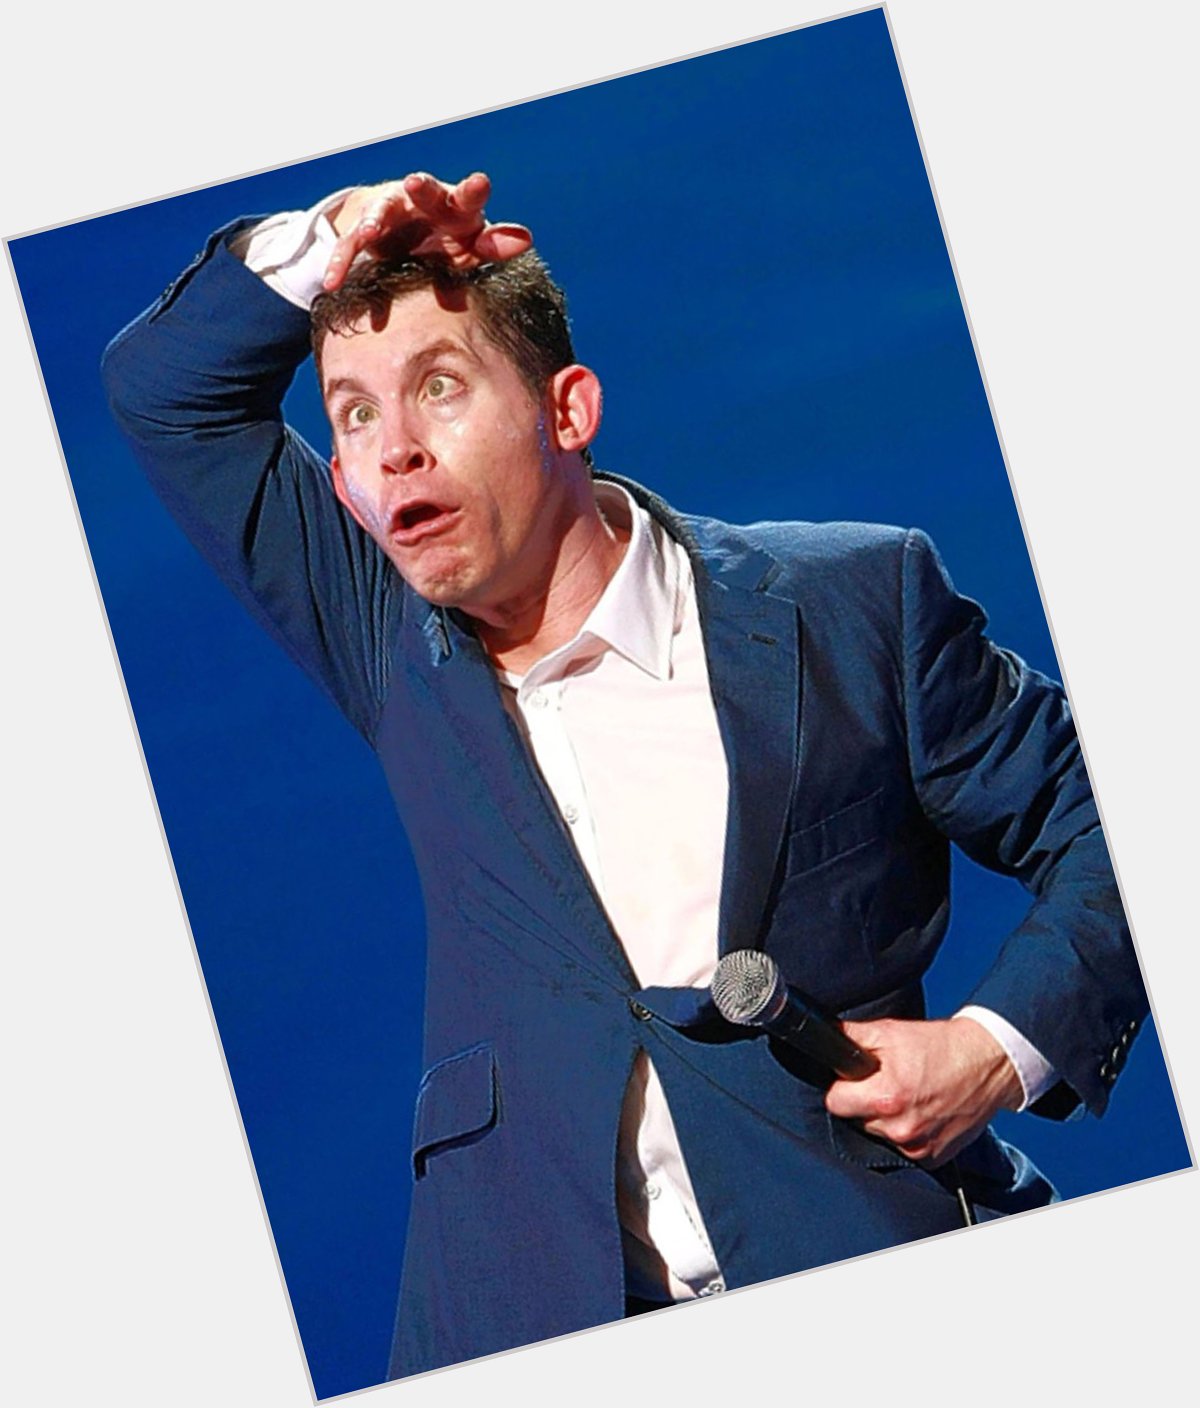 Happy Birthday Lee Evans who is 58 today!  